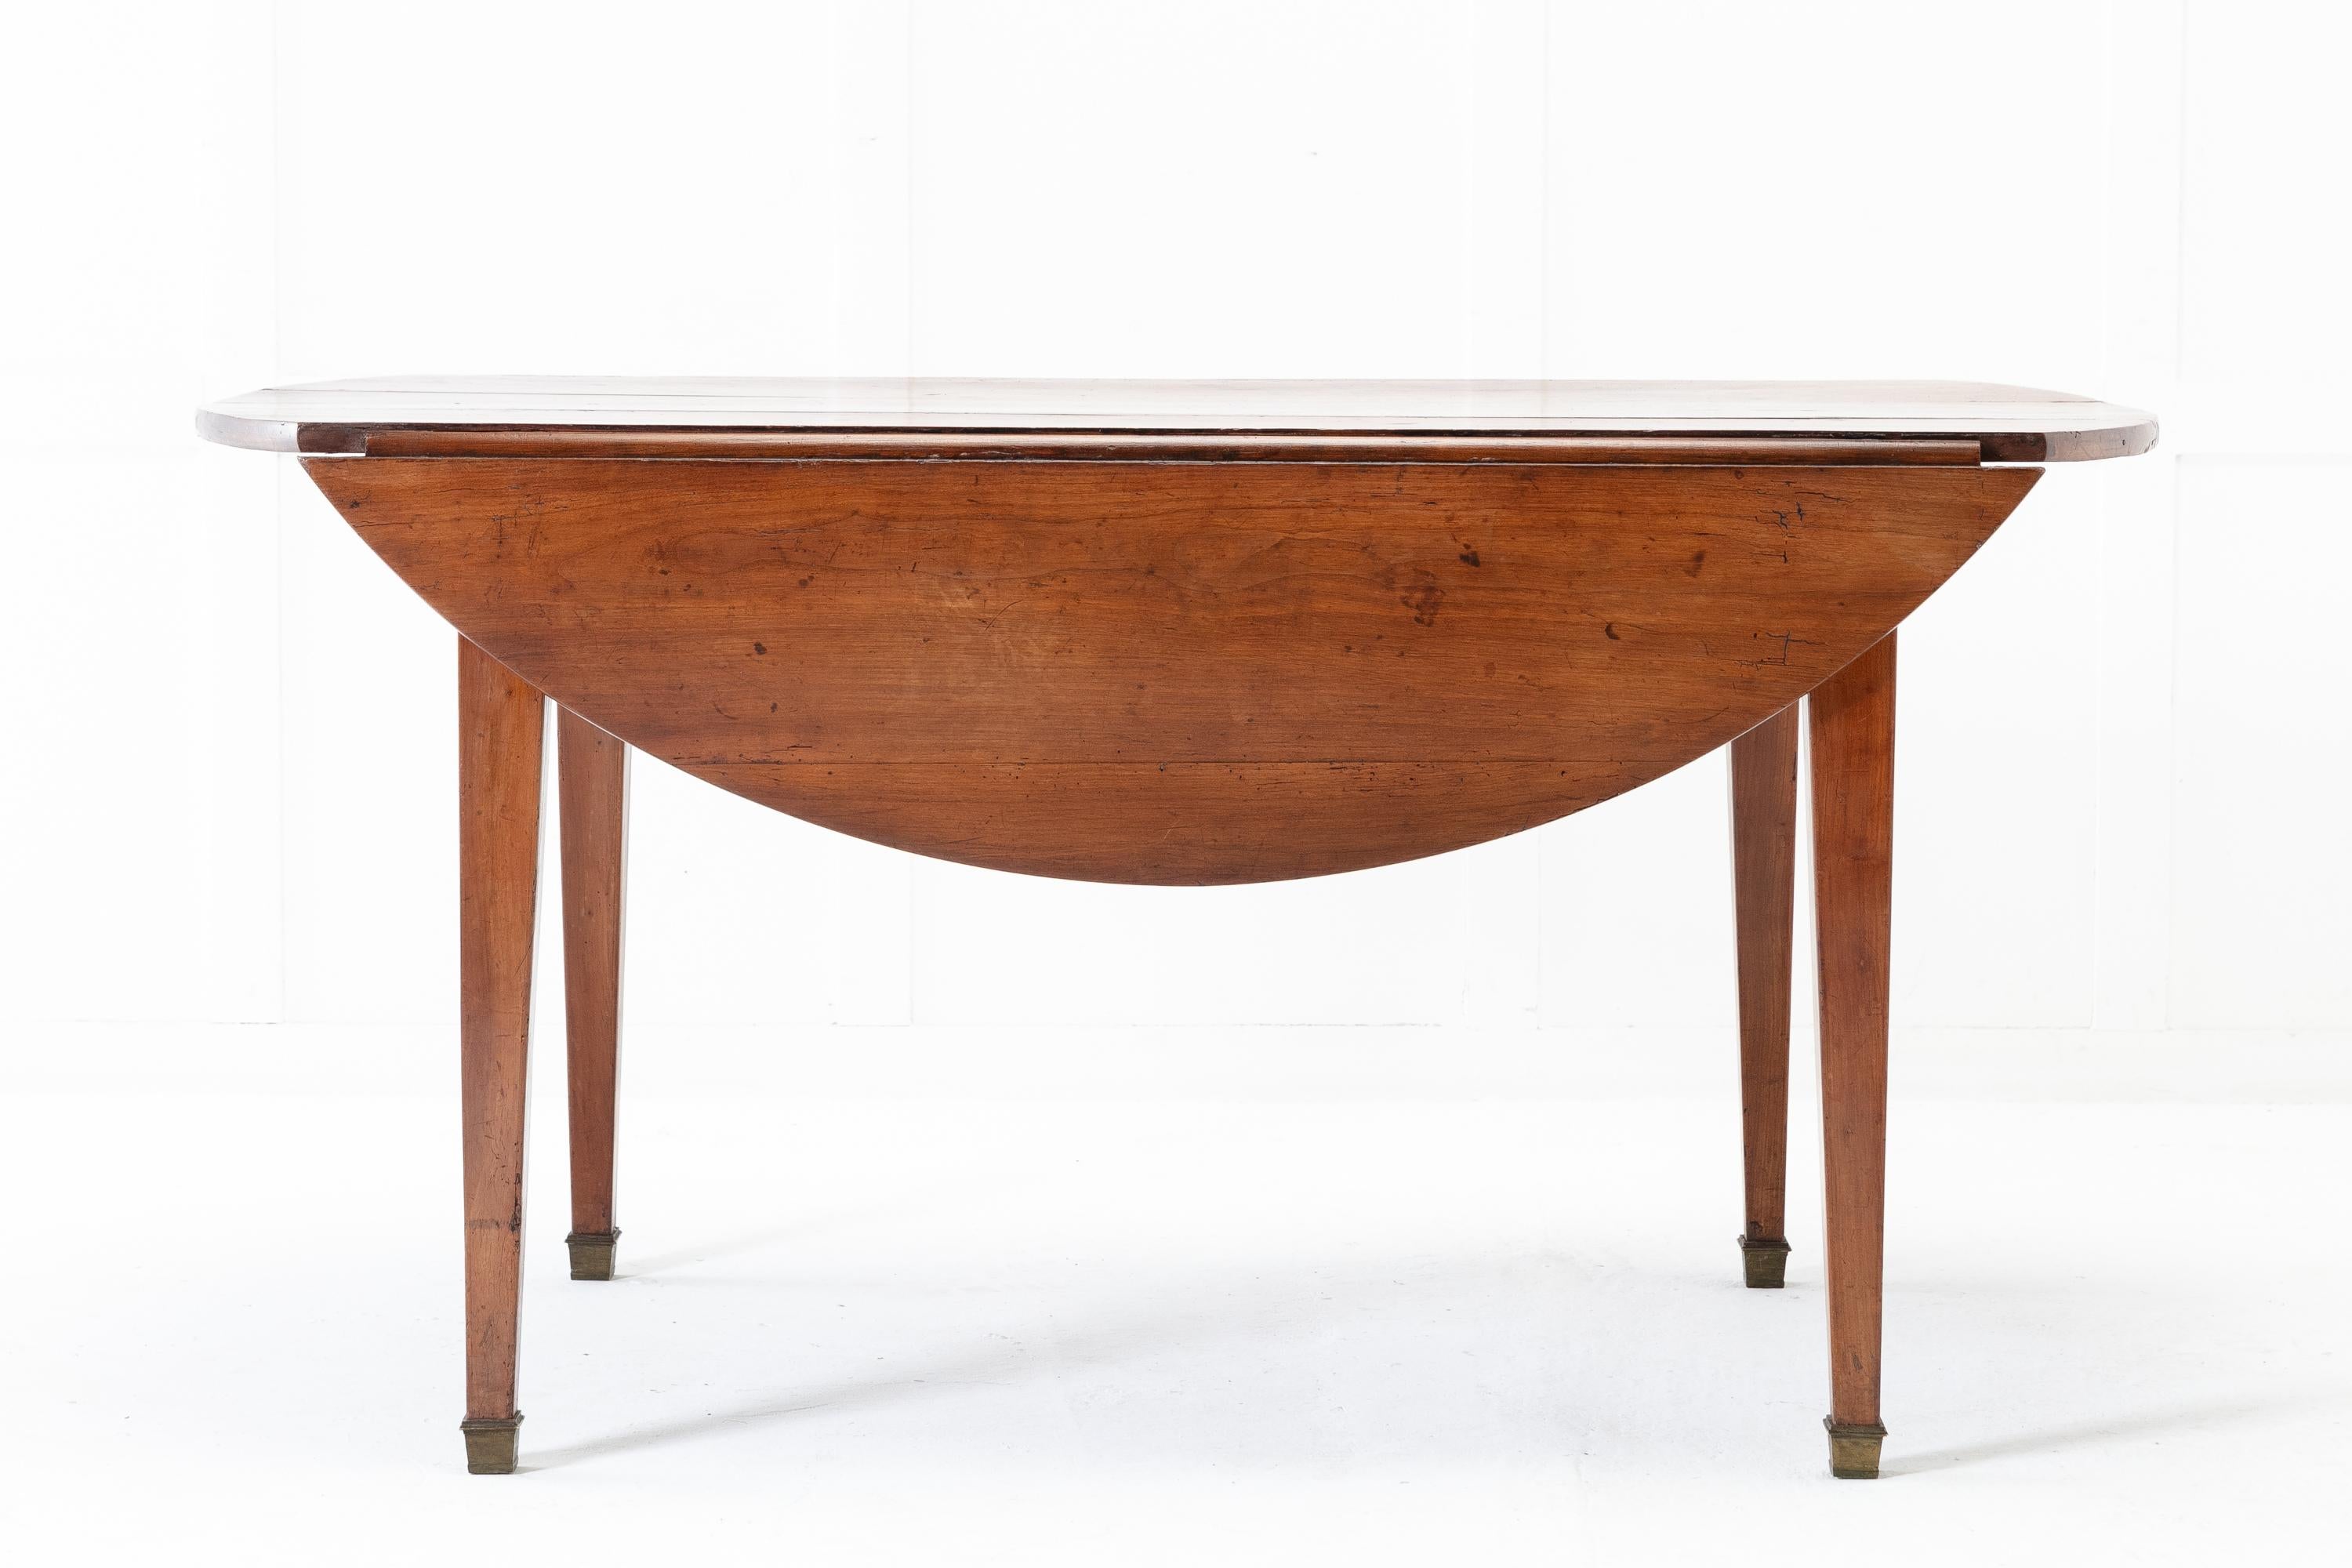 19th century French cherrywood dining table of oval shape when extended with drop leaves on each side. Expands with both drop leaves supported by pull-outs to create a table that can easily accommodate six people. Standing on sturdy, square tapering